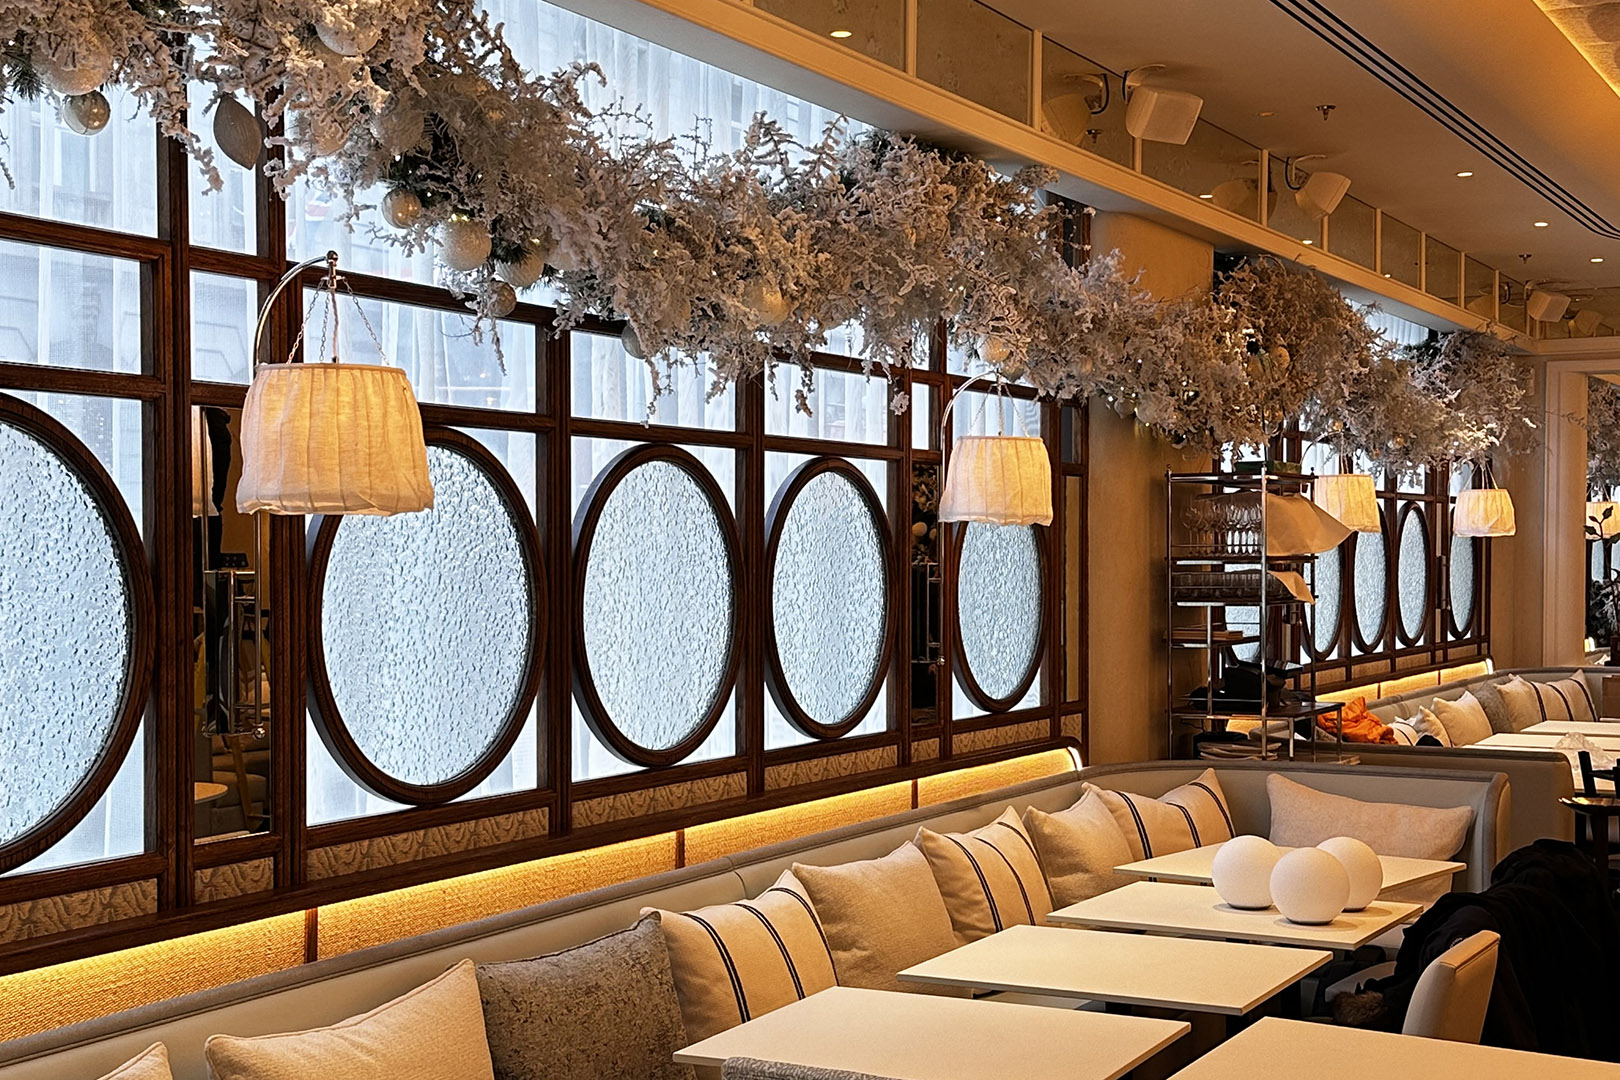 Restaurant view of Gaia London, showing the seating area and glazed joinery screens 